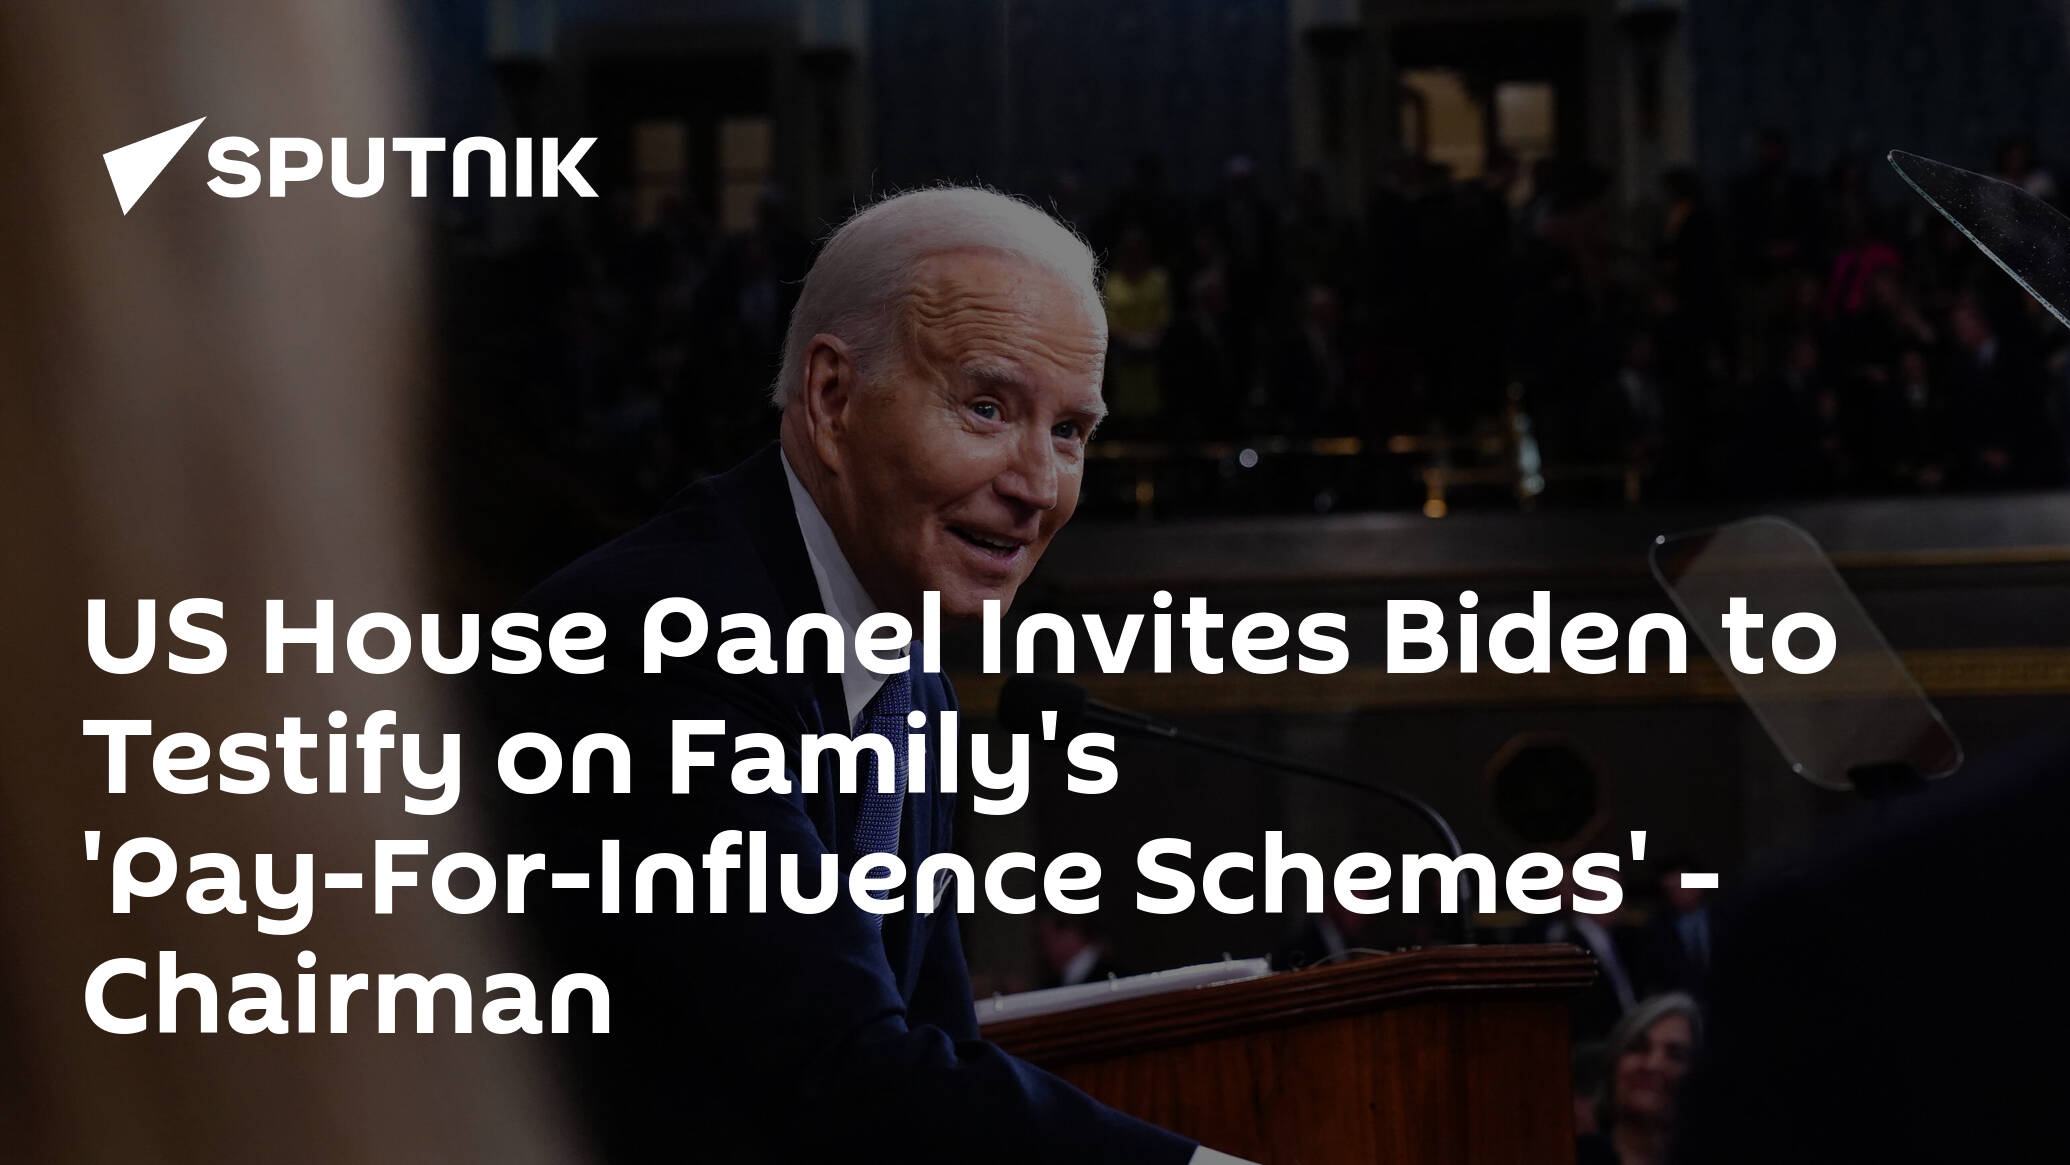 US House Panel Invites Biden to Testify on Family's 'Pay-For-Influence